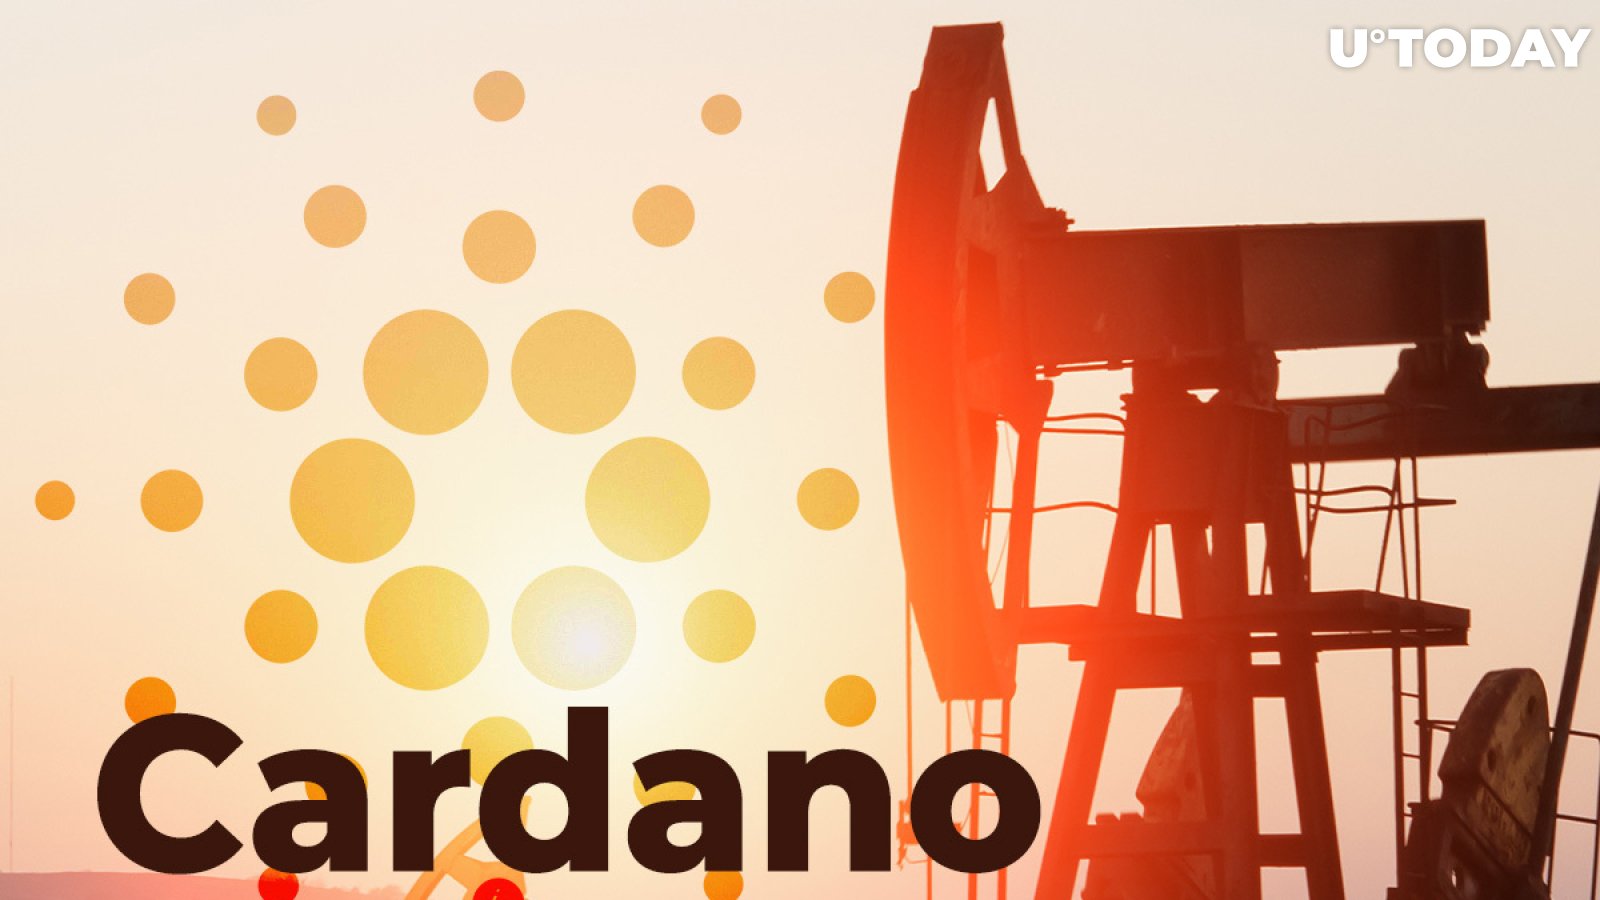 Cardano (ADA) Revisits Three-Year High, What Might Stay Behind Pump?